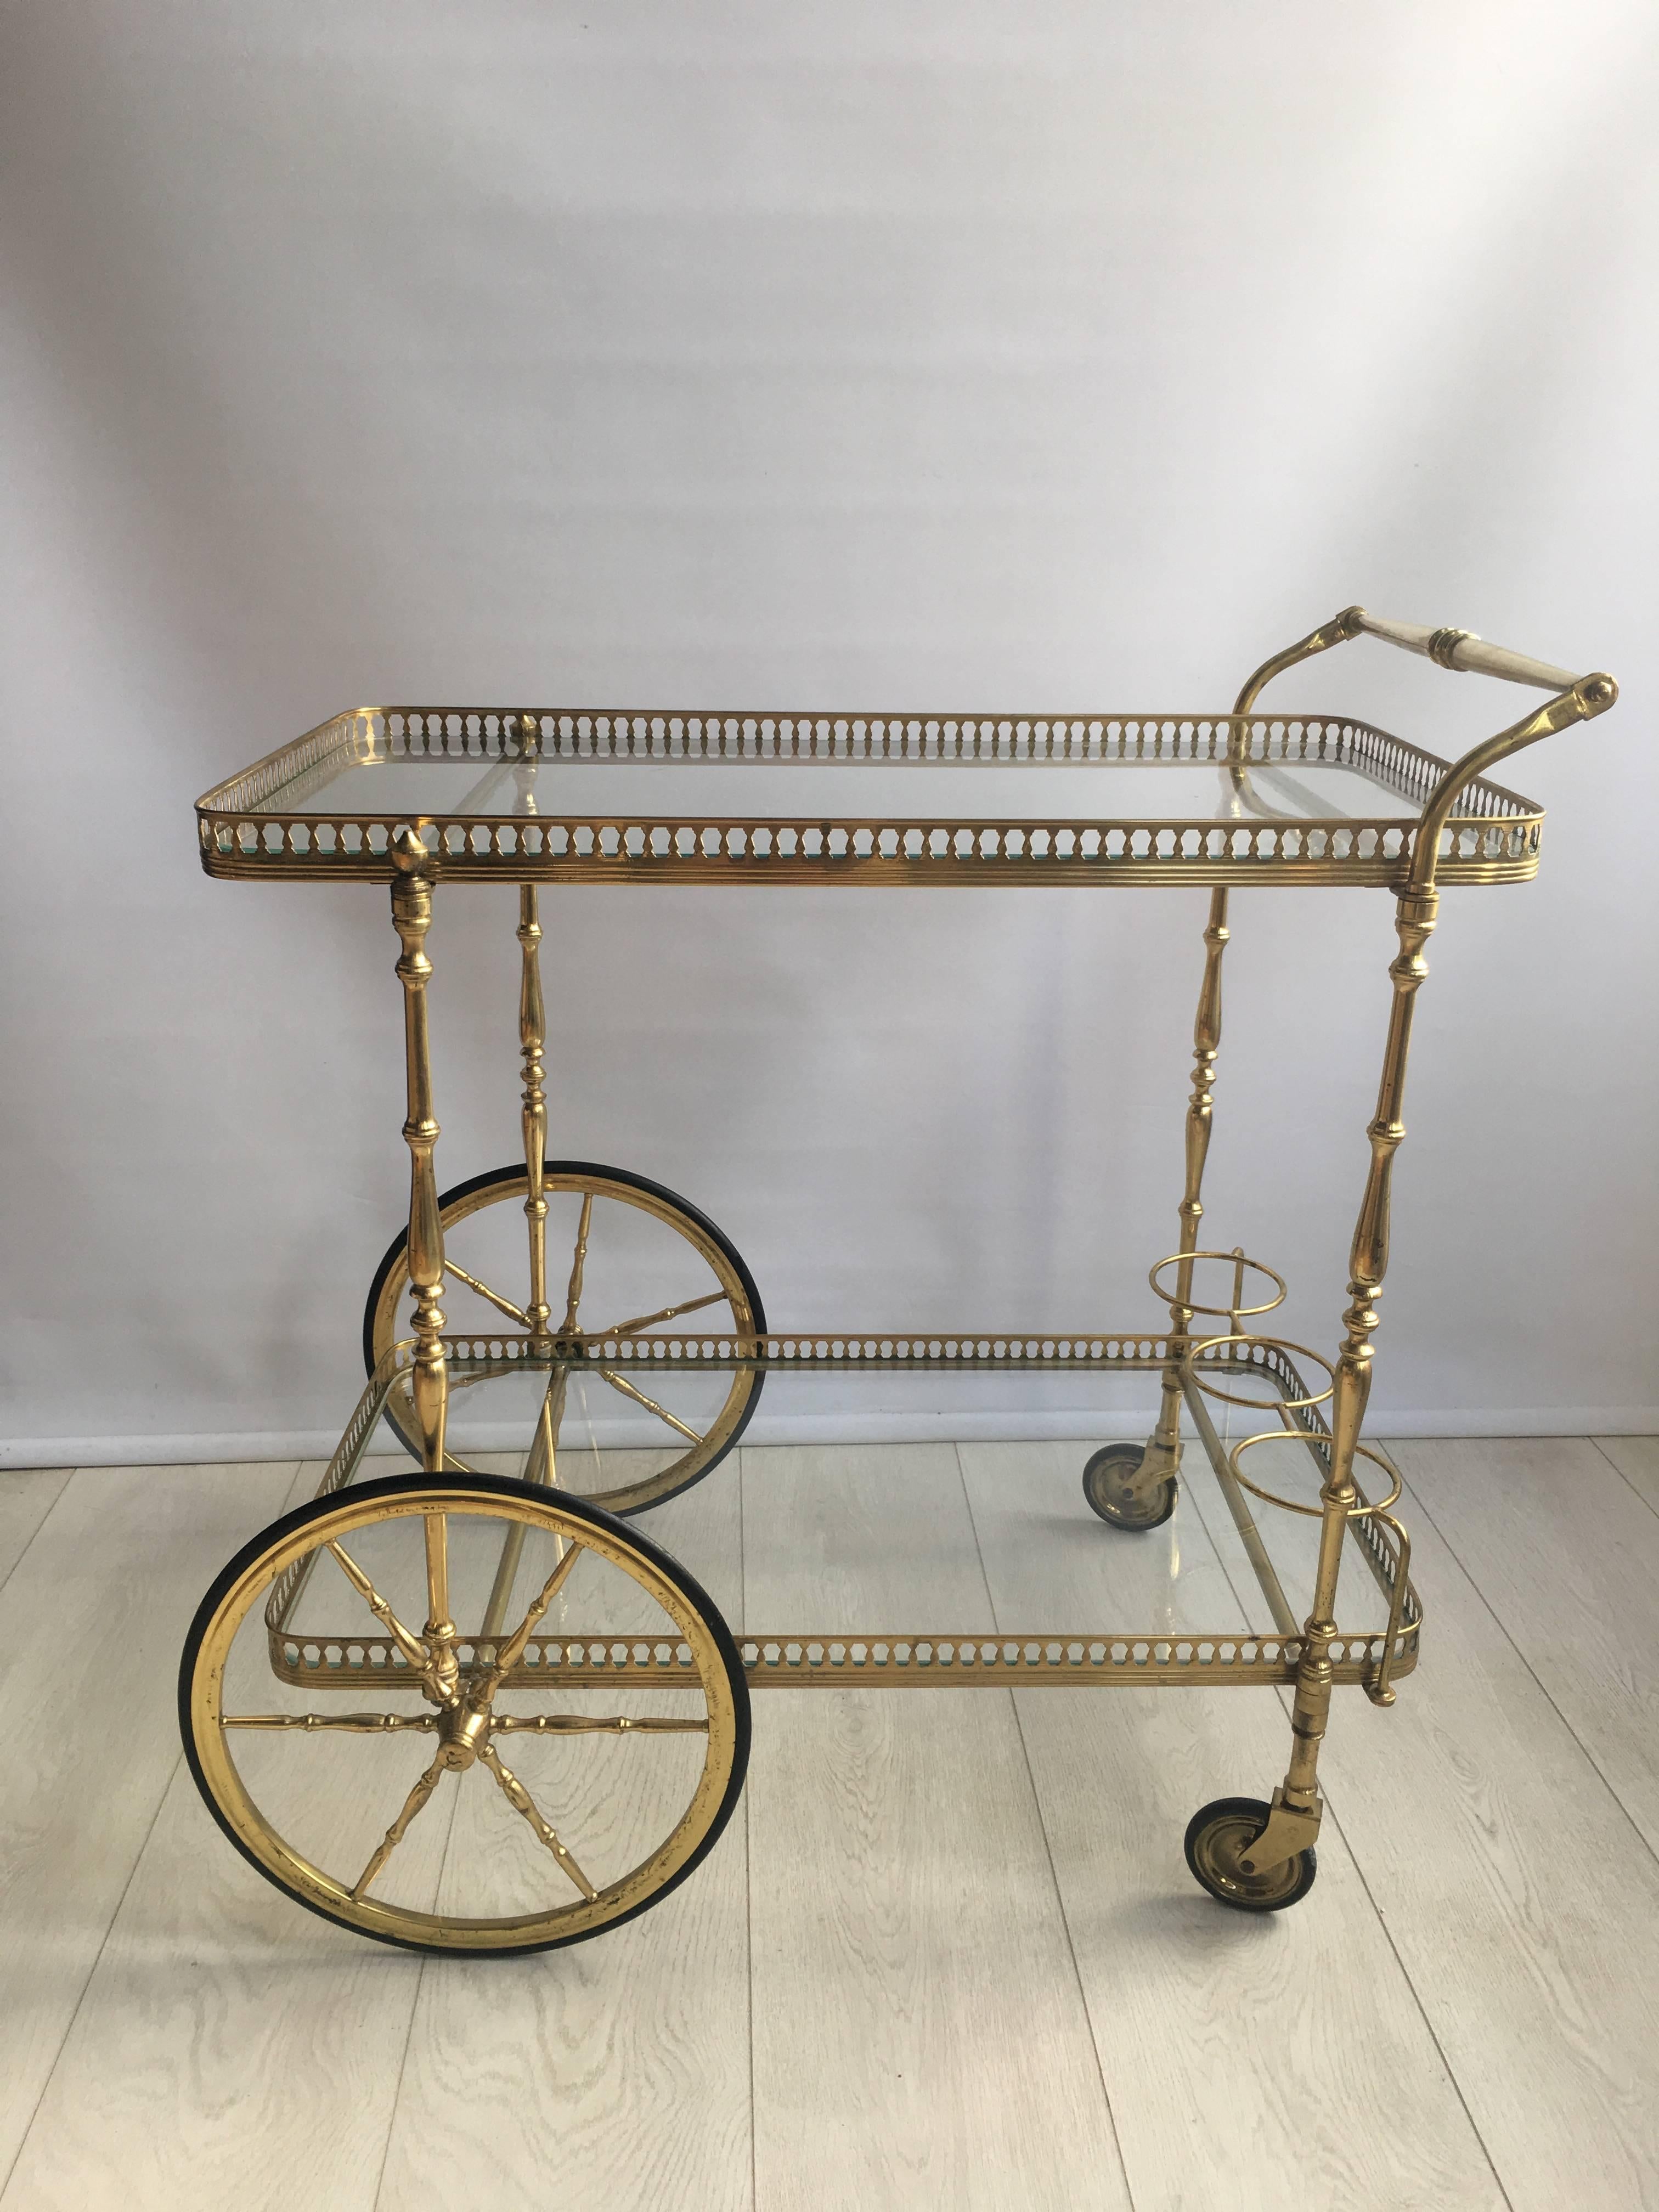 Classic vintage drinks trolley from France c1950

Lacquered brass frame with lovely aged patina

Bottle holder to lower tier

Top tray measures 70cm wide by 39.5cm deep and stands 66cm to the glass
Overall dims 73cm wide, 52cm deep and 75cm tall